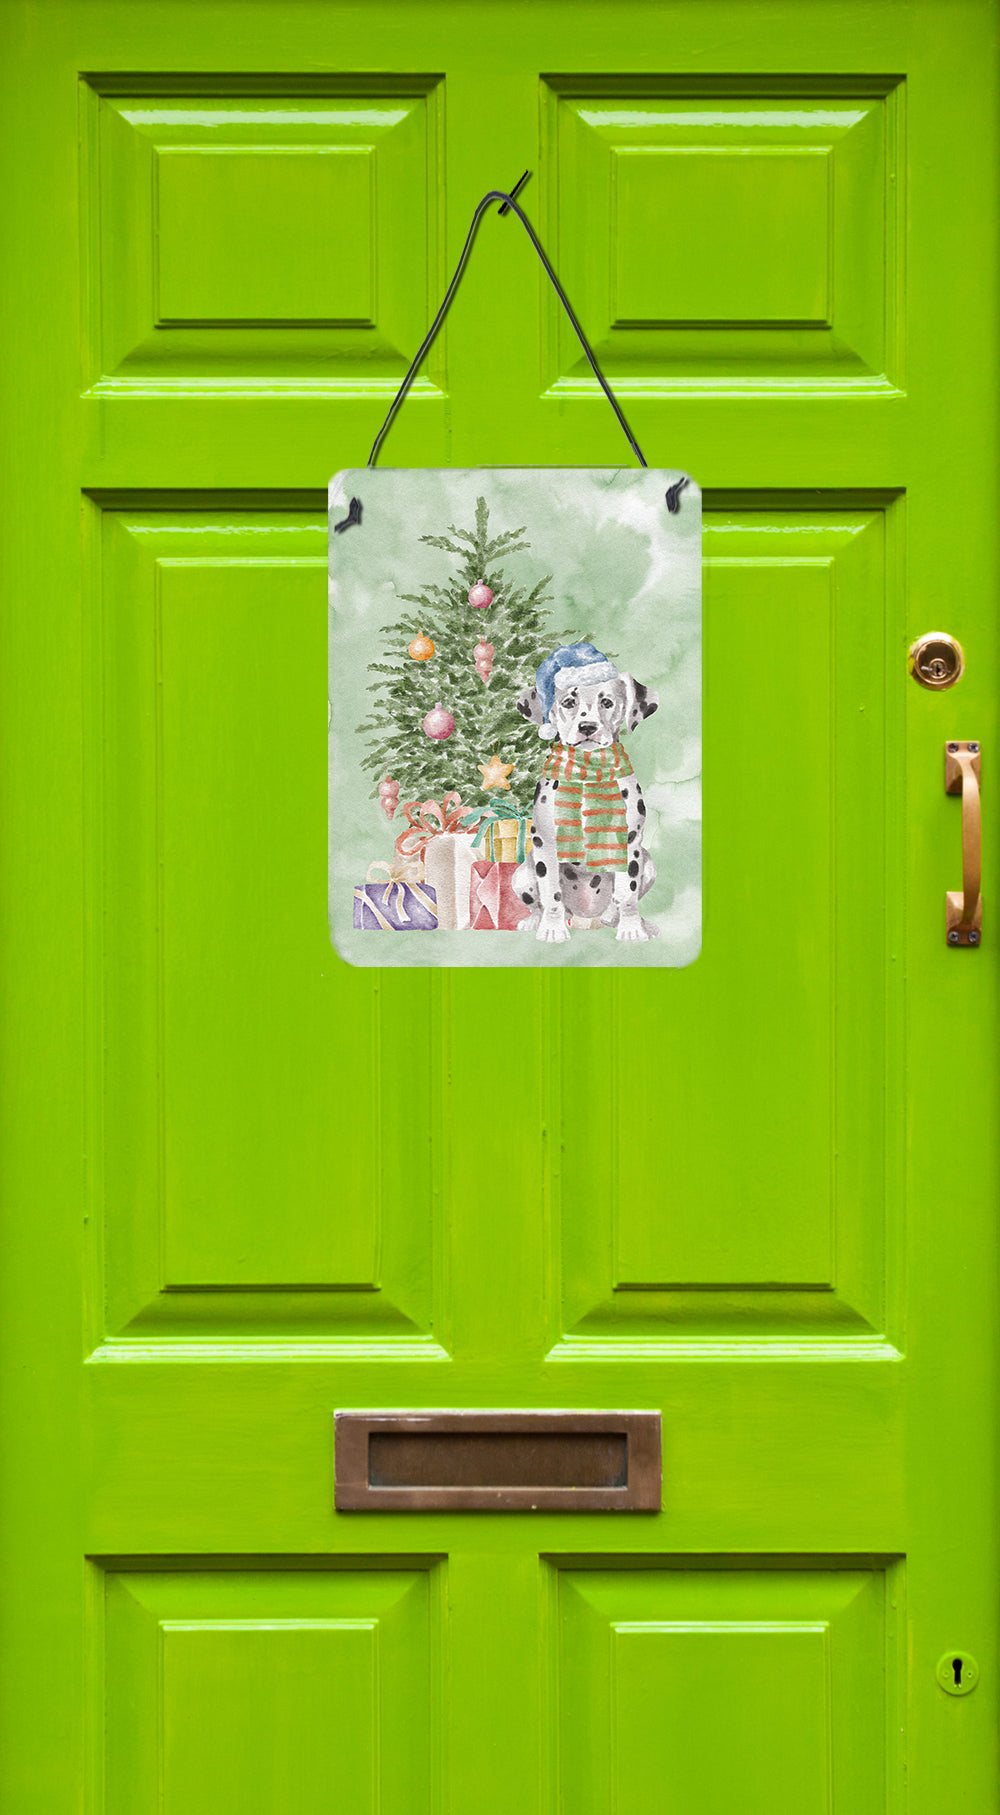 Buy this Christmas Dalmatian Puppy Wall or Door Hanging Prints